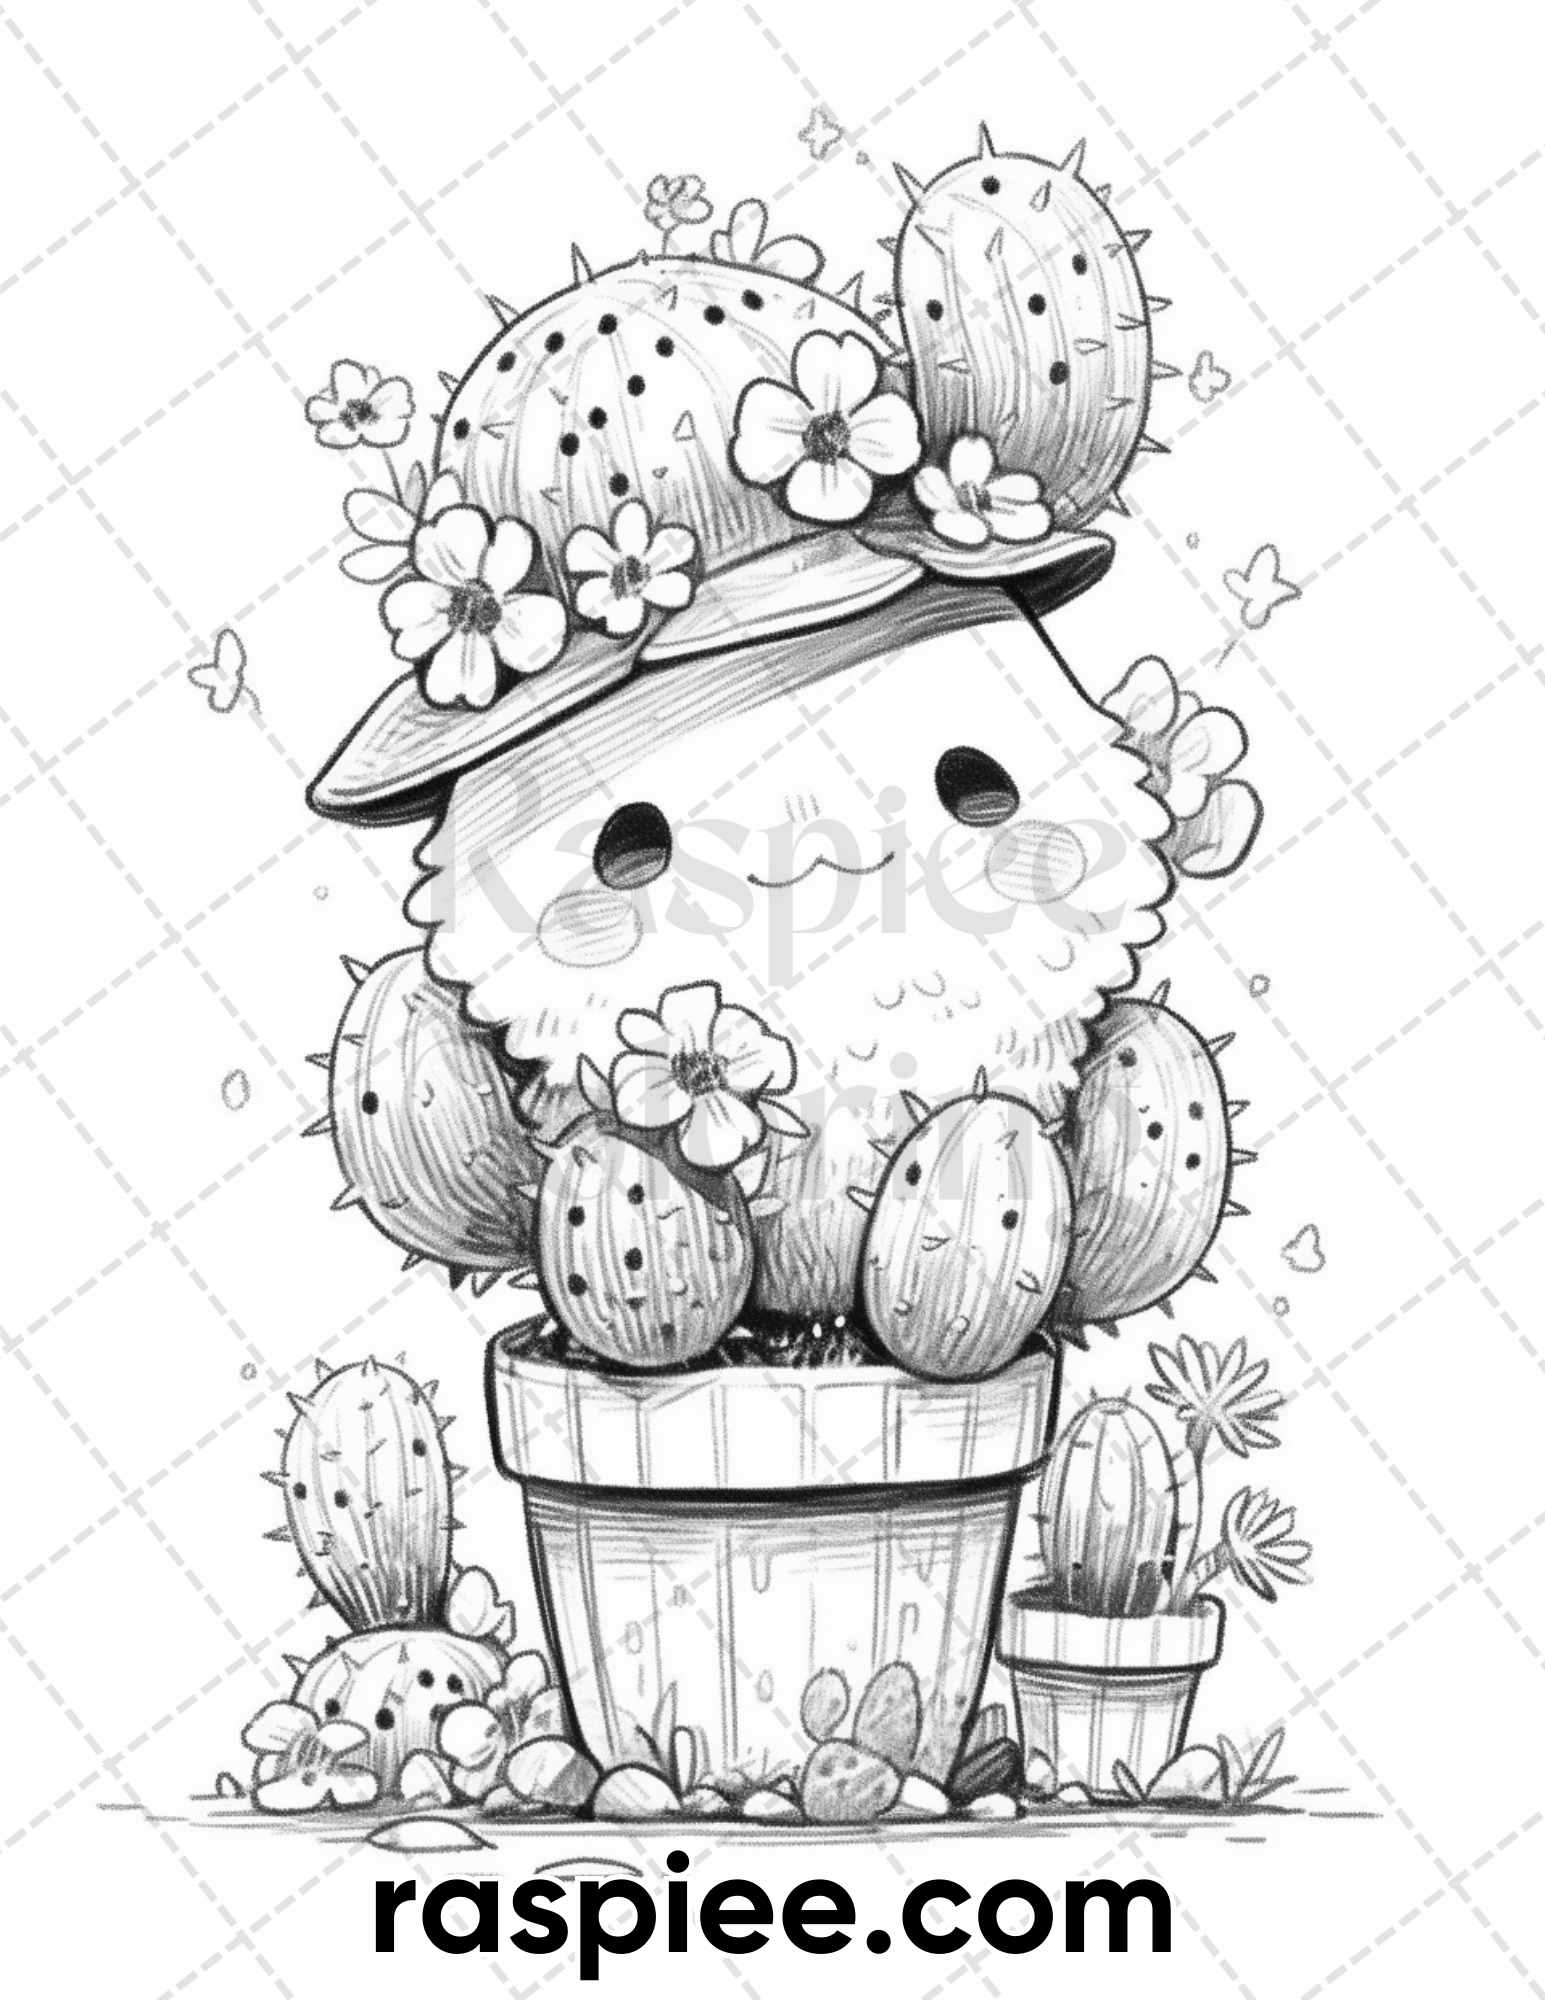 60 Cute Cactus Adventure Grayscale Coloring Pages for Adults